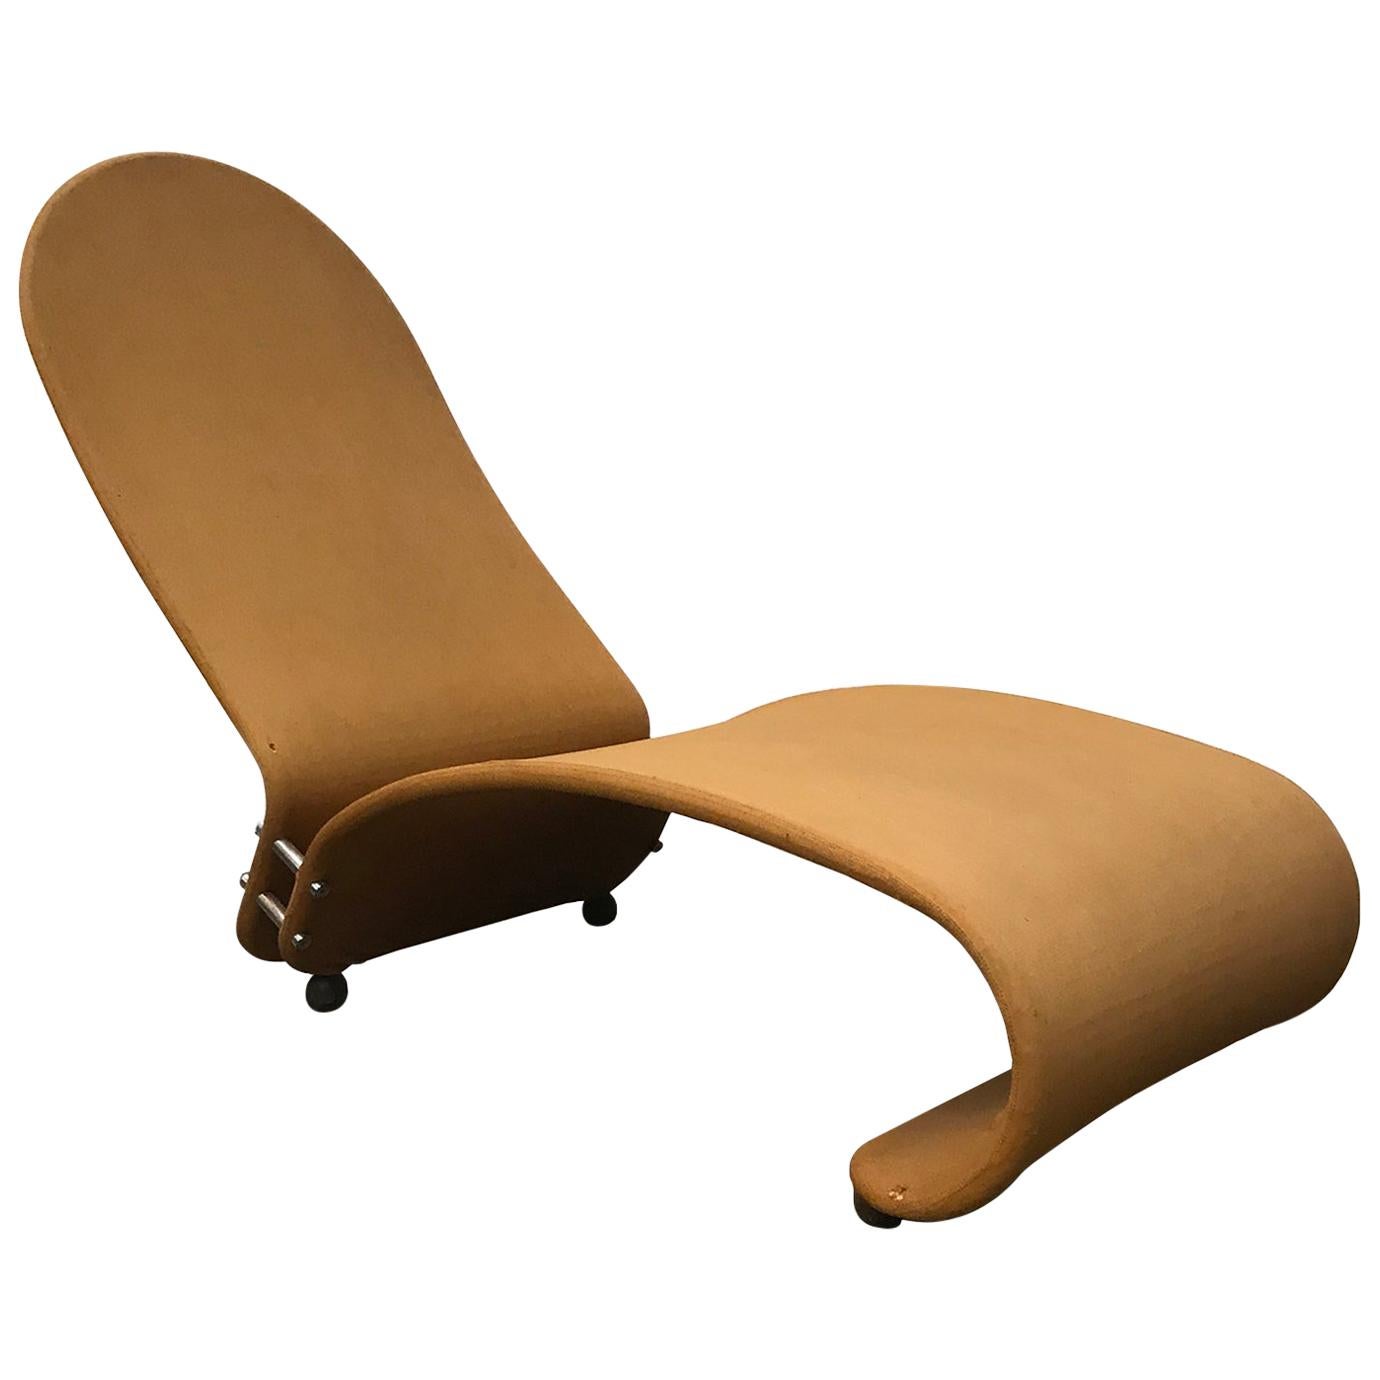 1973, Verner Panton for Rosenthal, 1-2-3 Serie, Rare Chaise Longue, Ochre Fabric For Sale